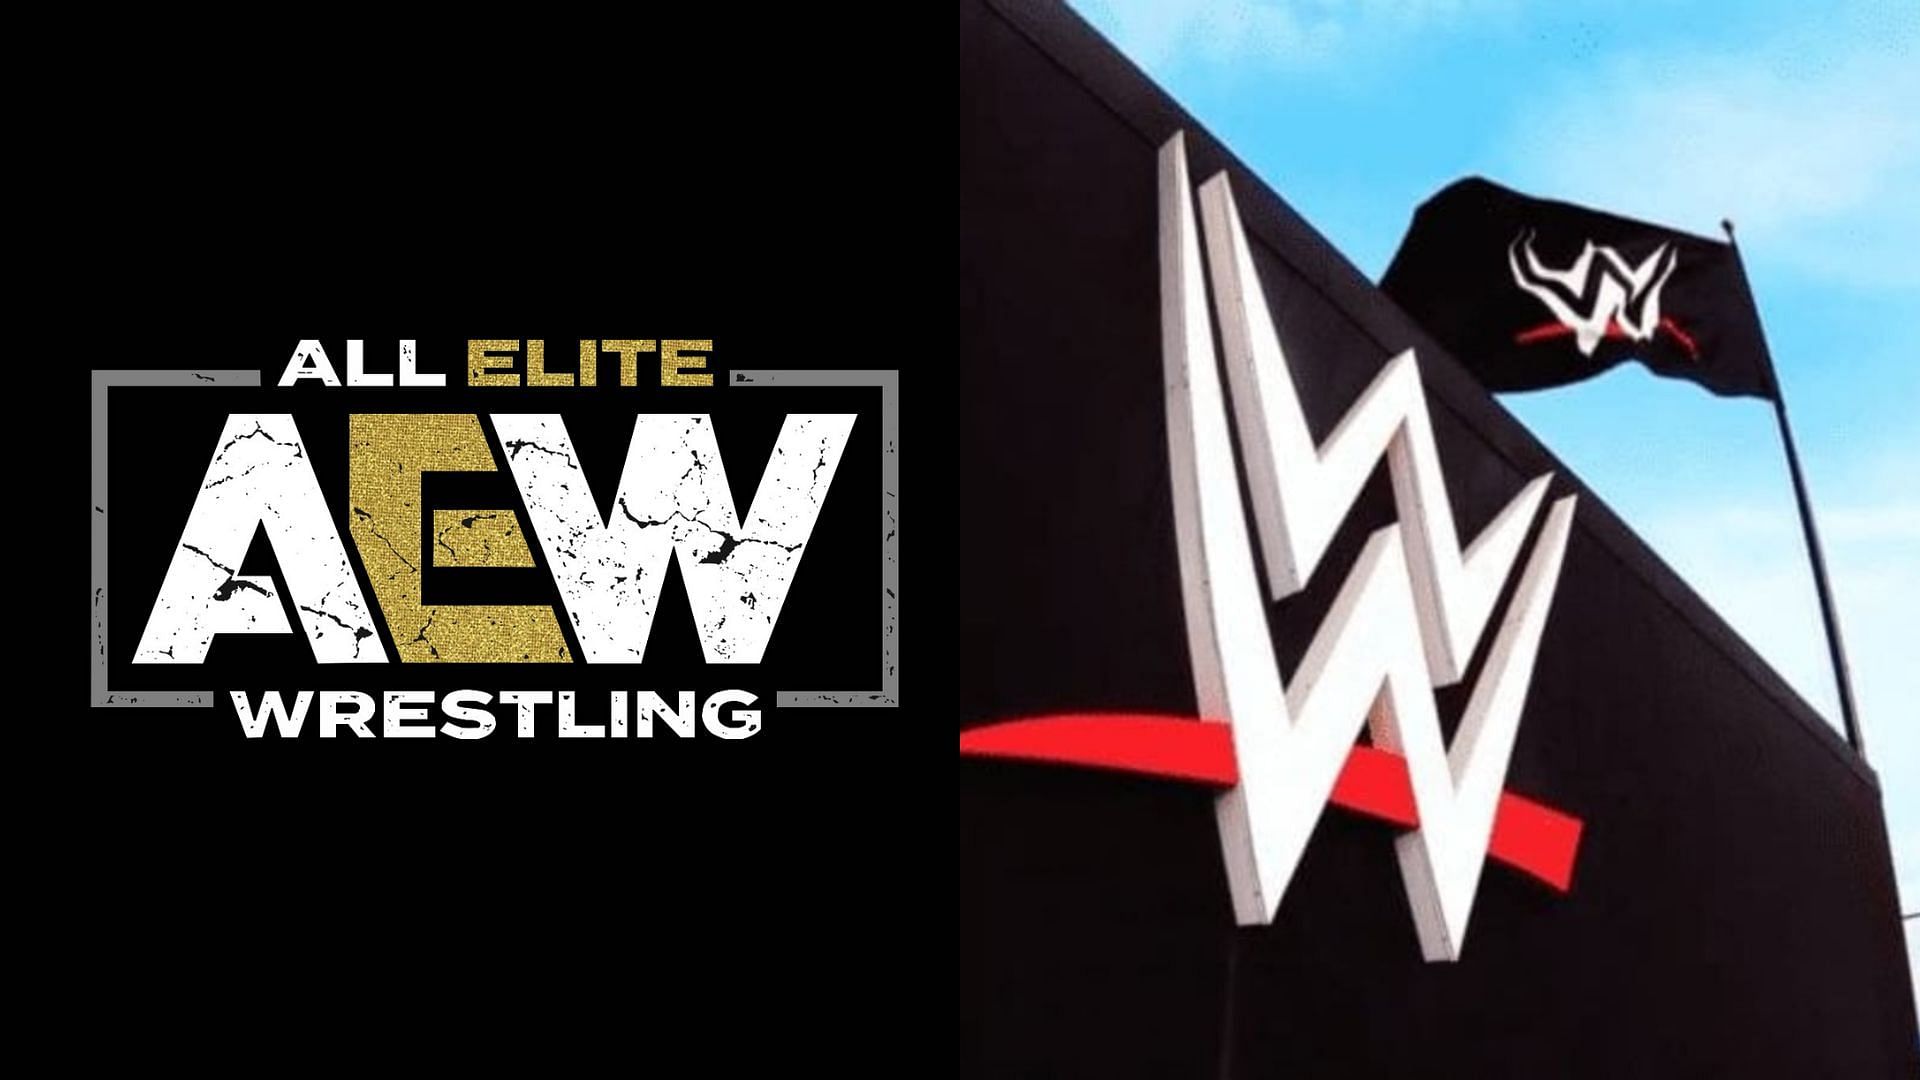 AEW has proved itself to be credible competitor to WWE